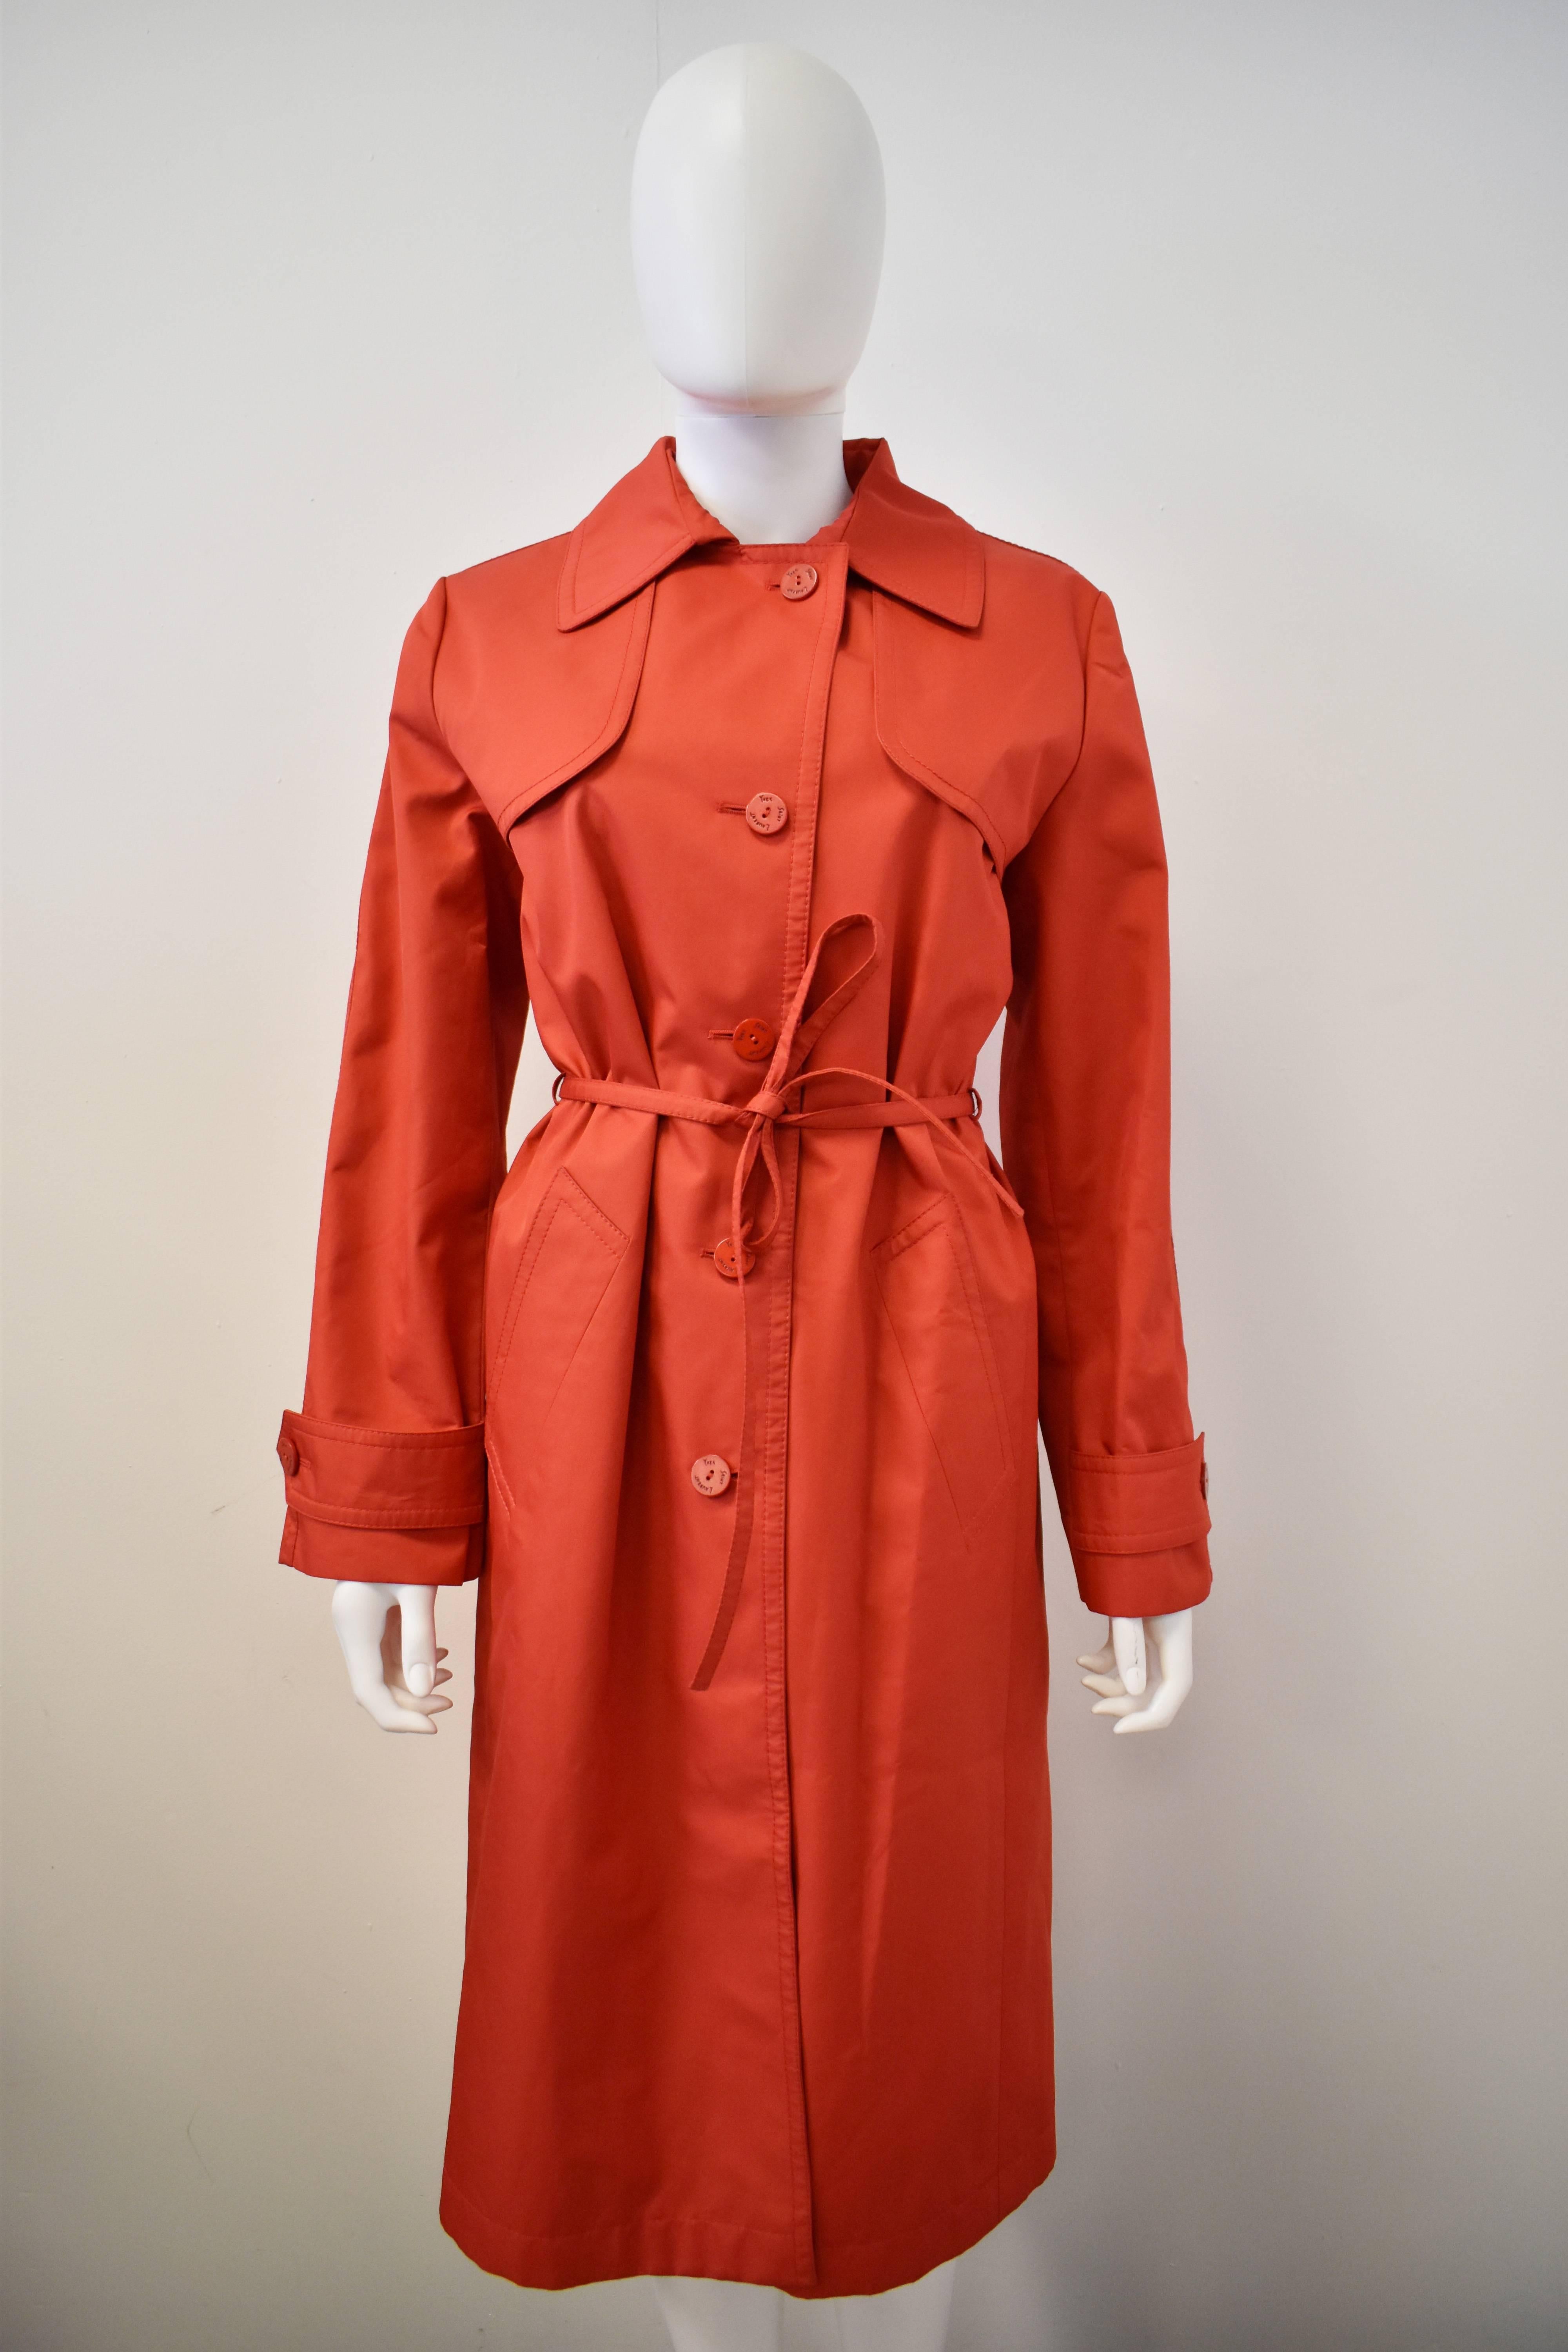 A beautiful 1980’s vintage red trench coat from the Yves Saint Laurent subsidiary line Rive Gauche. The coat has a classic single breasted trench design with gun flaps on either side of the bust, deep back yoke, vent at the back and a thin tie at